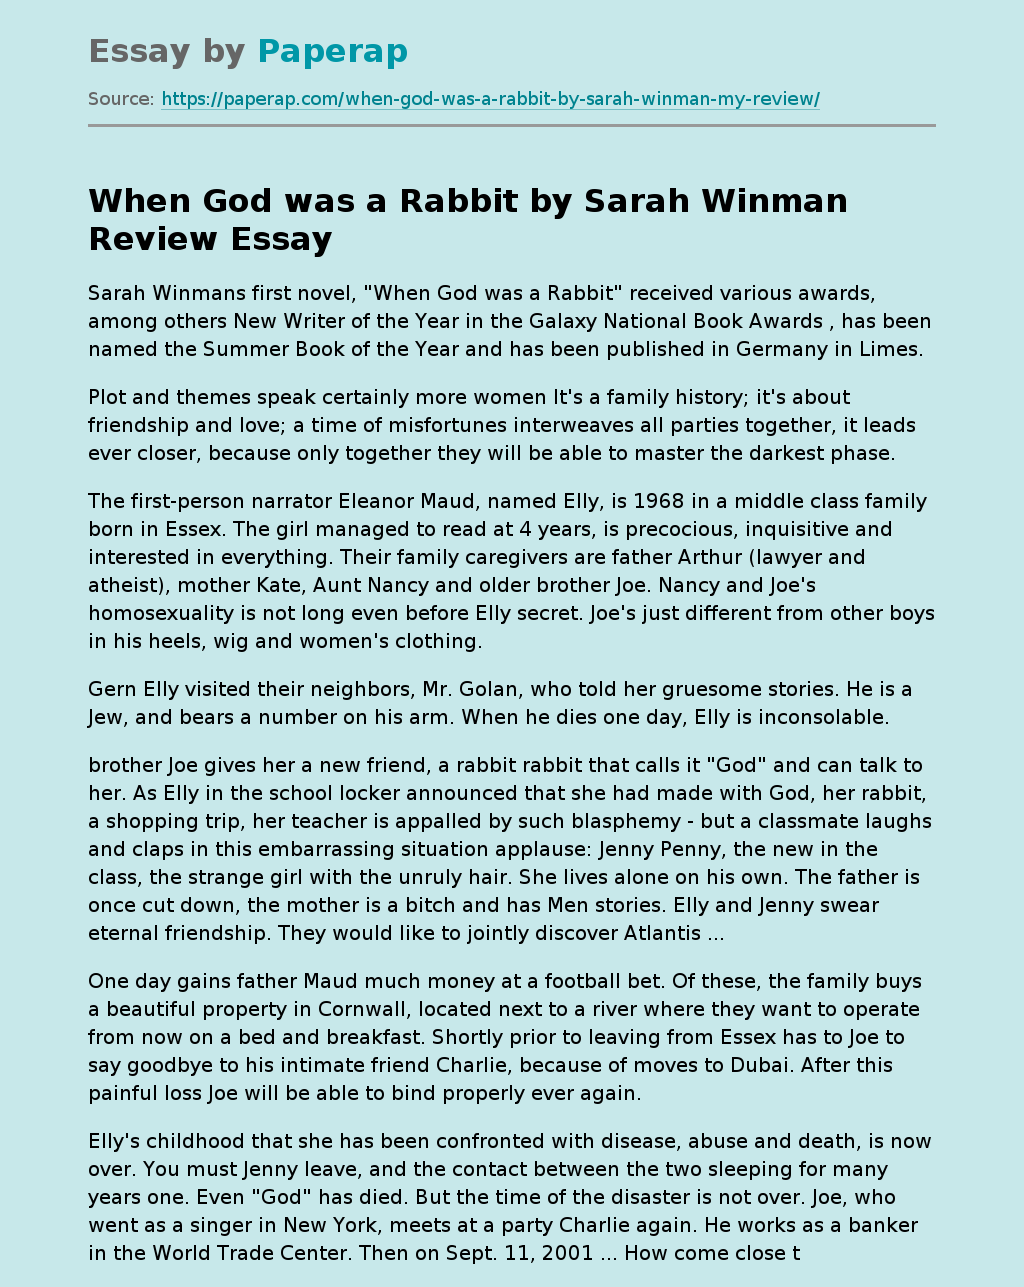 "When God was a Rabbit" by Sarah Winman